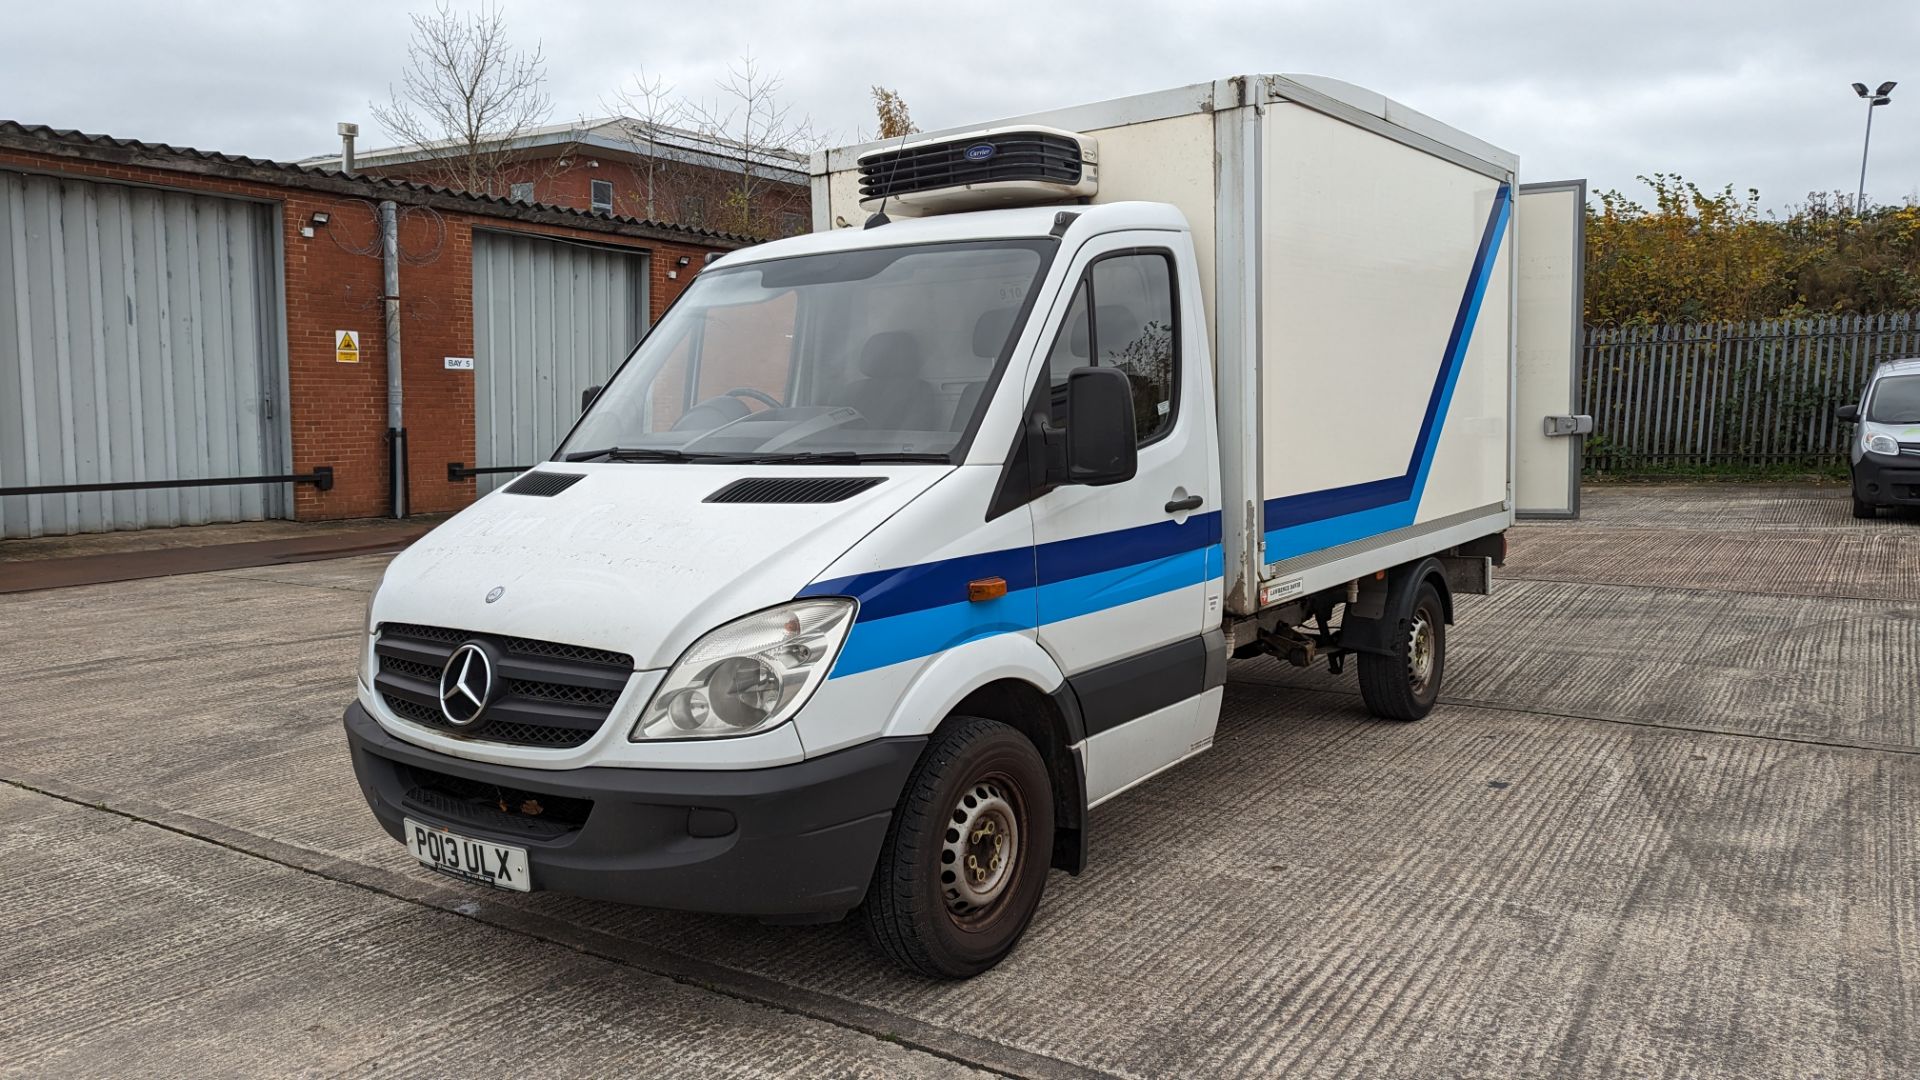 PO13 ULX Mercedes-Benz Sprinter 313 CDI refrigerated box van with onboard generator, 6 speed auto ge - Image 3 of 39